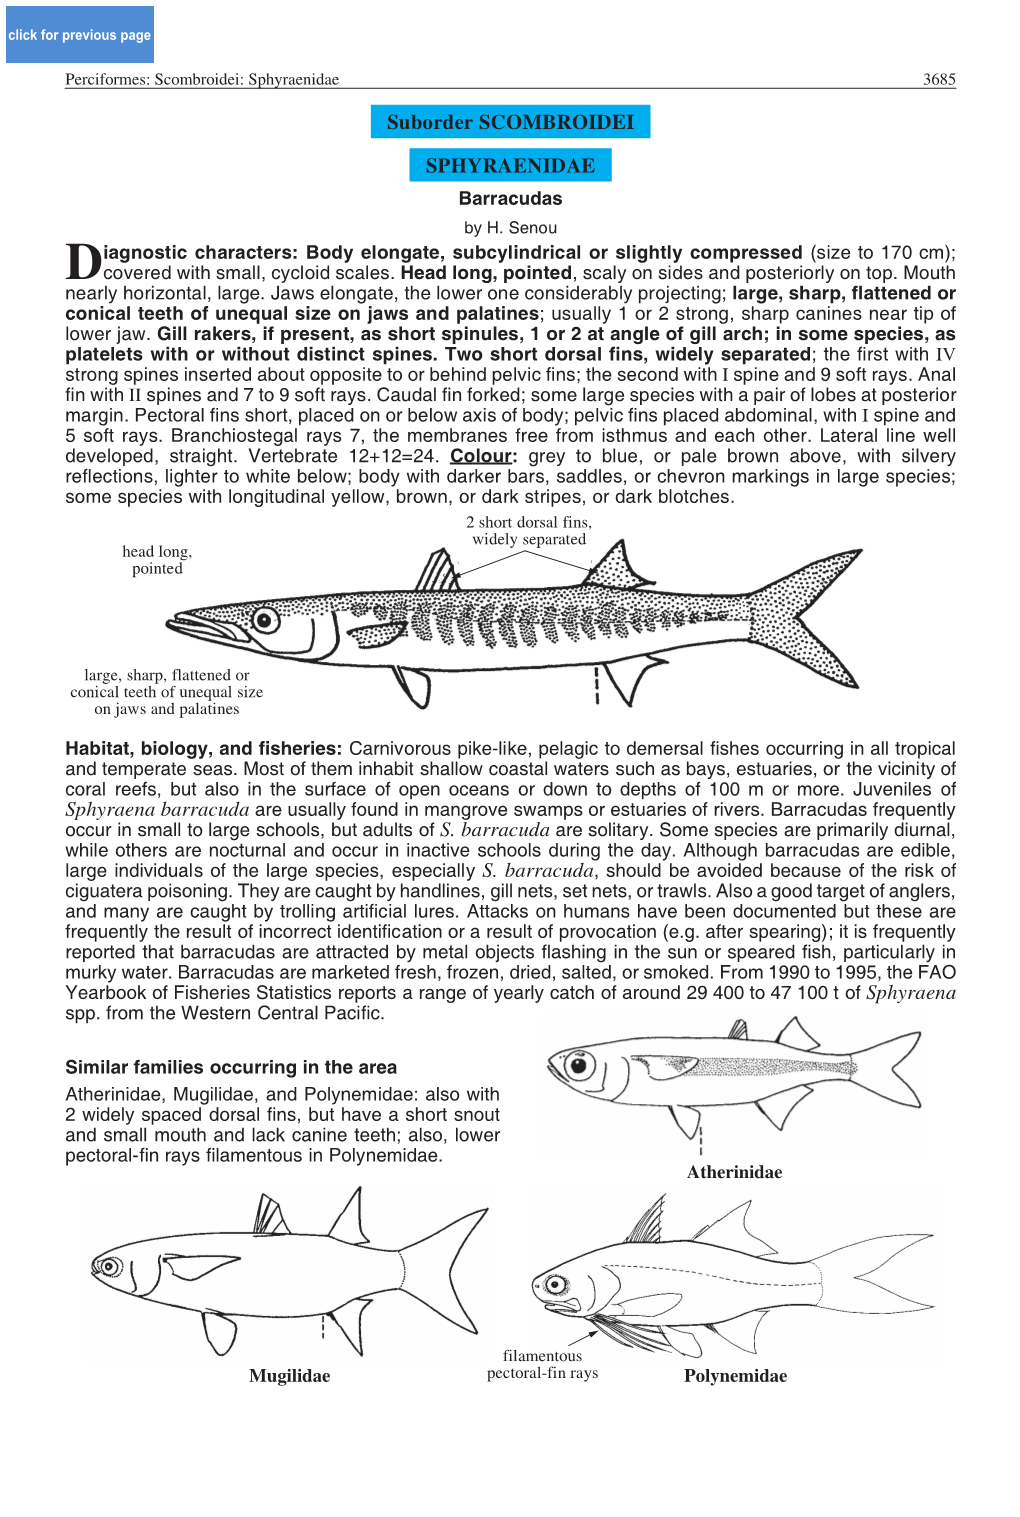 Sphyraena Barracuda Are Usually Found in Mangrove Swamps Or Estuaries of Rivers